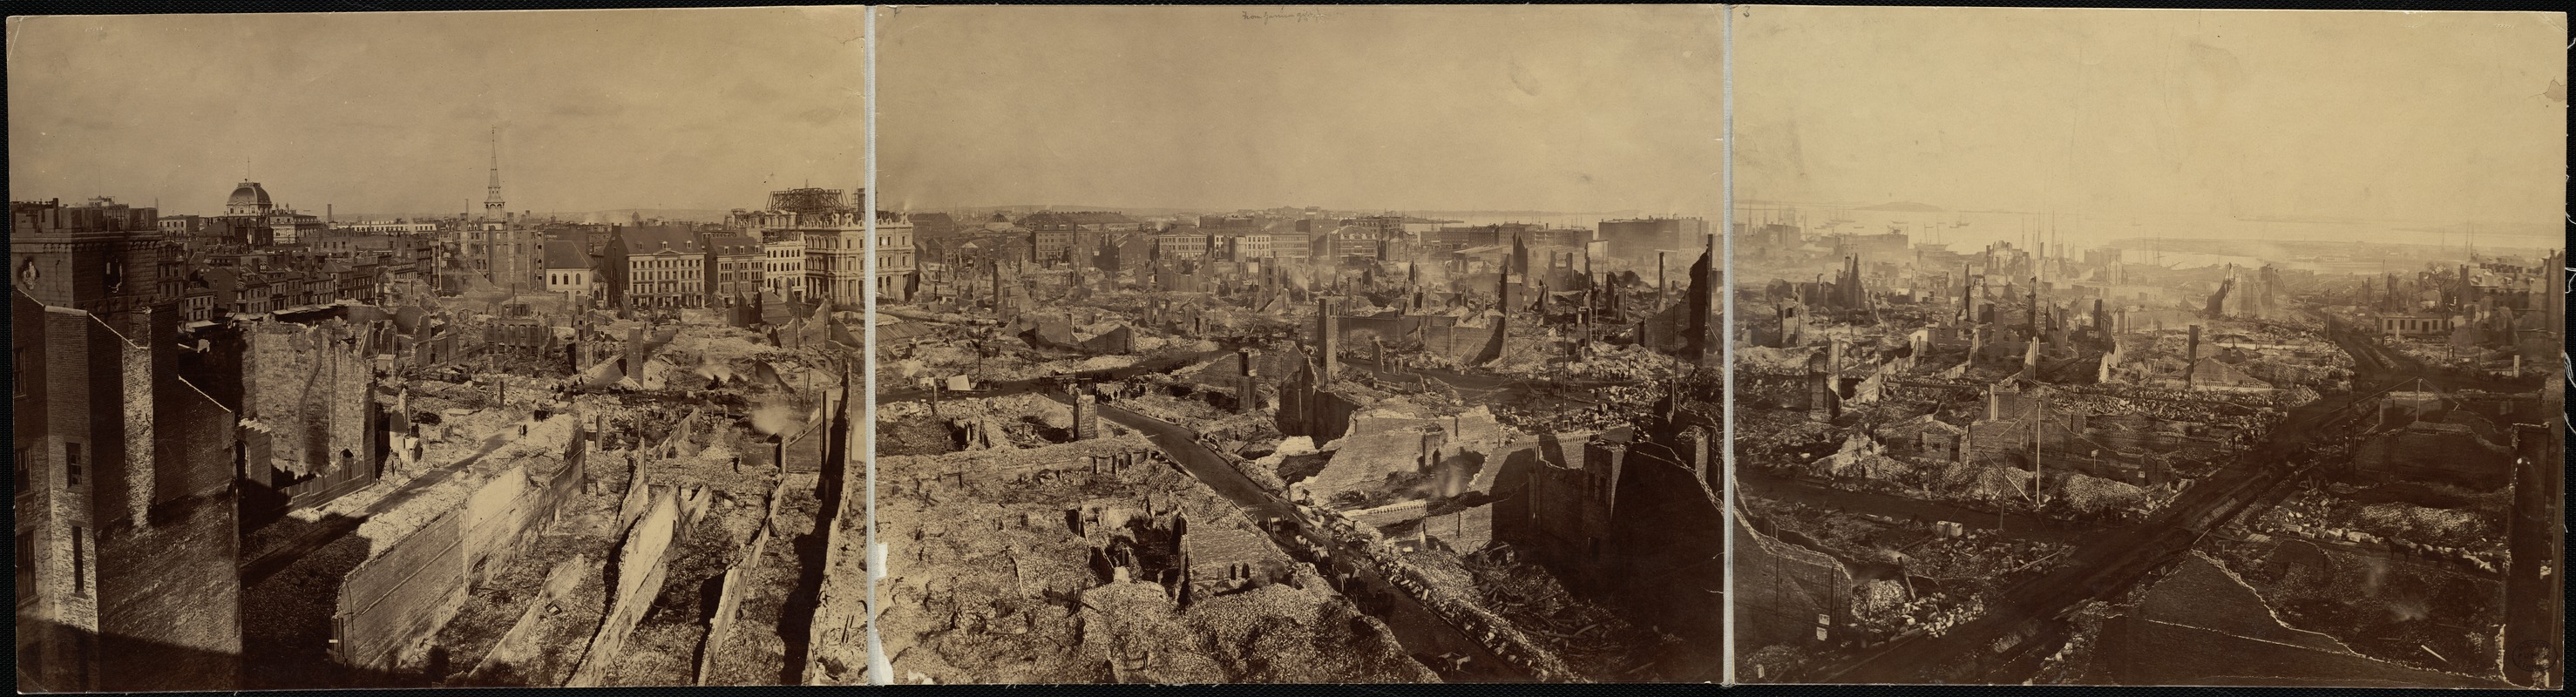 Photographic panorama of the "Burnt District" of Boston, after the Great Fire, November 9, 10, 1872